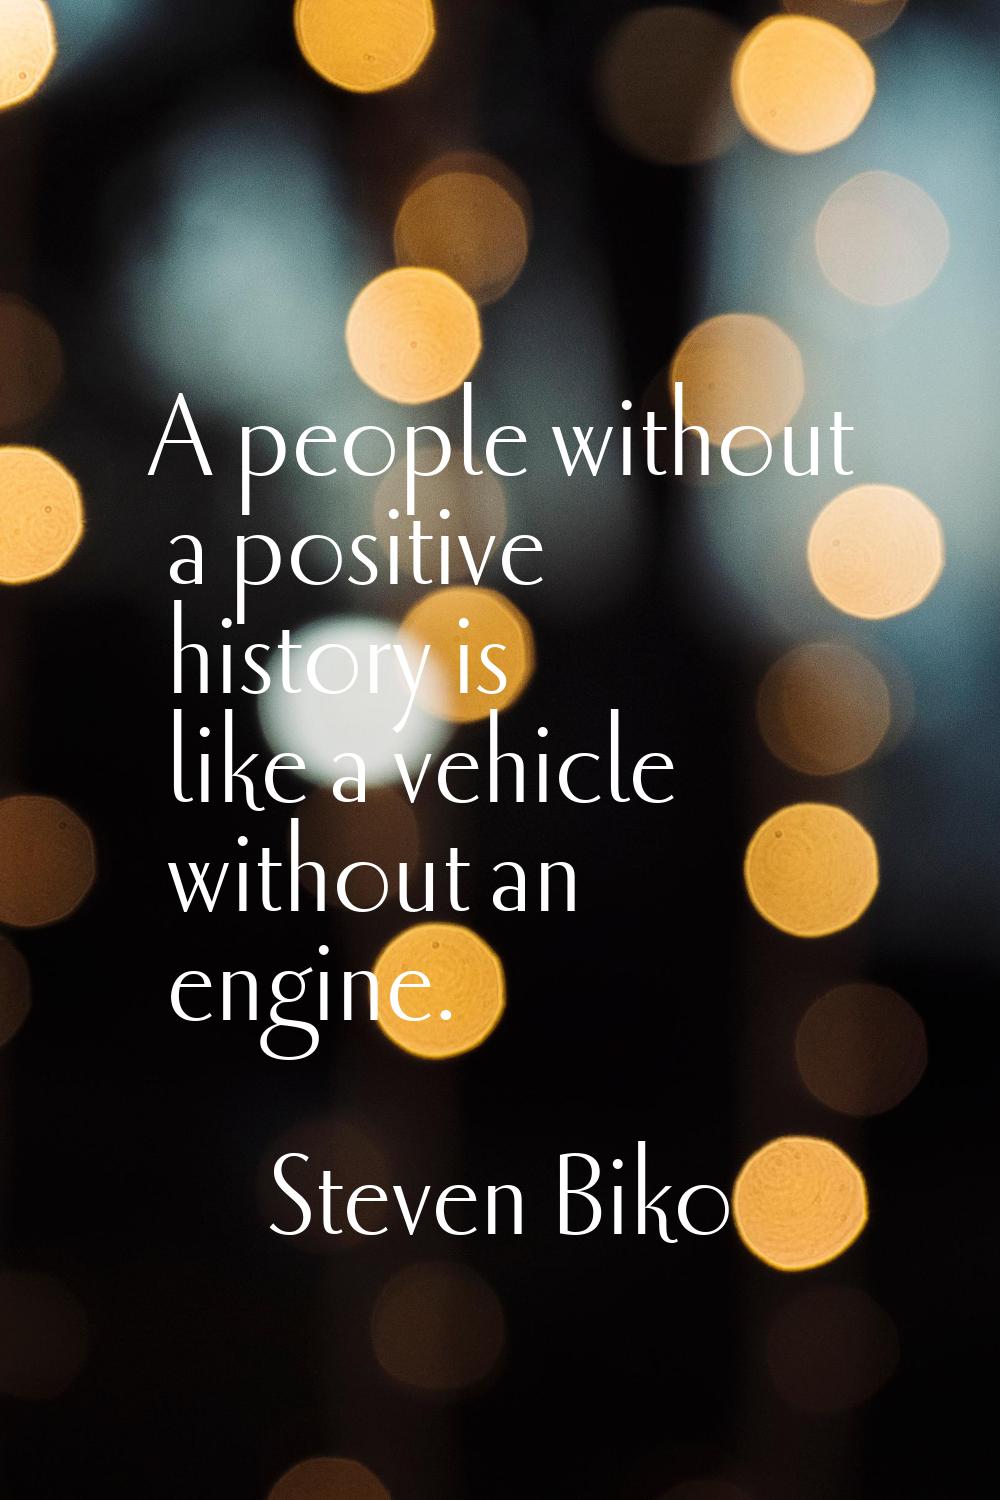 A people without a positive history is like a vehicle without an engine.